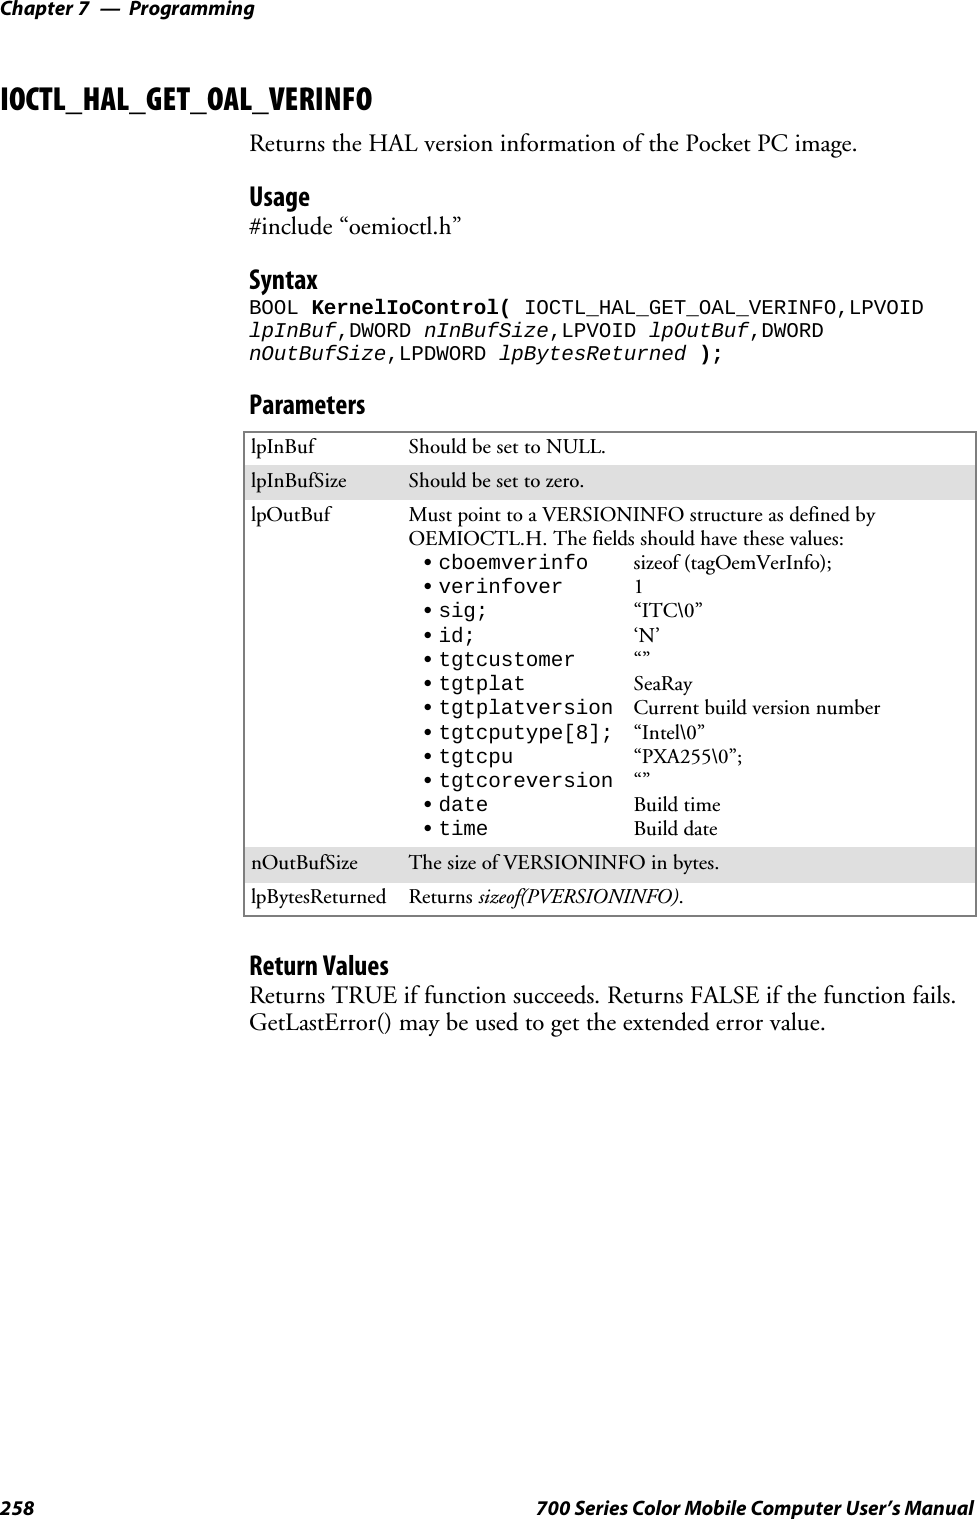 ProgrammingChapter —7258 700 Series Color Mobile Computer User’s ManualIOCTL_HAL_GET_OAL_VERINFOReturns the HAL version information of the Pocket PC image.Usage#include “oemioctl.h”SyntaxBOOL KernelIoControl( IOCTL_HAL_GET_OAL_VERINFO,LPVOIDlpInBuf,DWORD nInBufSize,LPVOID lpOutBuf,DWORDnOutBufSize,LPDWORD lpBytesReturned );ParameterslpInBuf Should be set to NULL.lpInBufSize Should be set to zero.lpOutBuf Must point to a VERSIONINFO structure as defined byOEMIOCTL.H. The fields should have these values:Scboemverinfo sizeof (tagOemVerInfo);Sverinfover 1Ssig; “ITC\0”Sid; ‘N’Stgtcustomer “”Stgtplat SeaRayStgtplatversion Current build version numberStgtcputype[8]; “Intel\0”Stgtcpu “PXA255\0”;Stgtcoreversion “”Sdate Build timeStime Build datenOutBufSize ThesizeofVERSIONINFOinbytes.lpBytesReturned Returns sizeof(PVERSIONINFO).Return ValuesReturns TRUE if function succeeds. Returns FALSE if the function fails.GetLastError() may be used to get the extended error value.